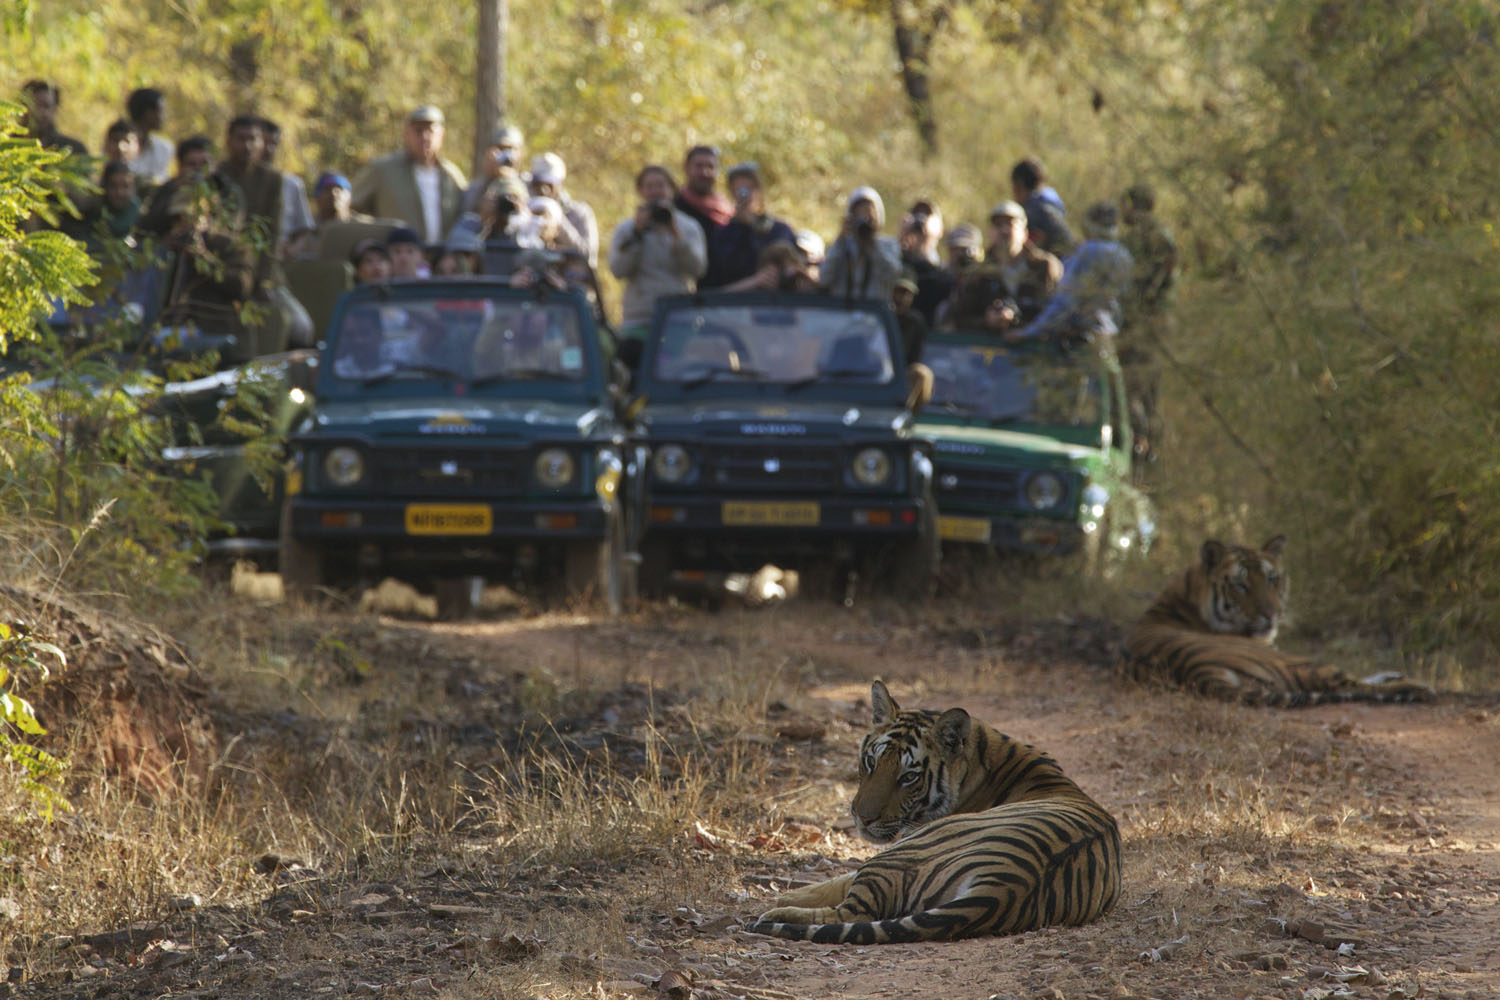 A crowd of tourists  photographing two tiger cubs sitting on a road inside Bandhavgarh National Park, India.